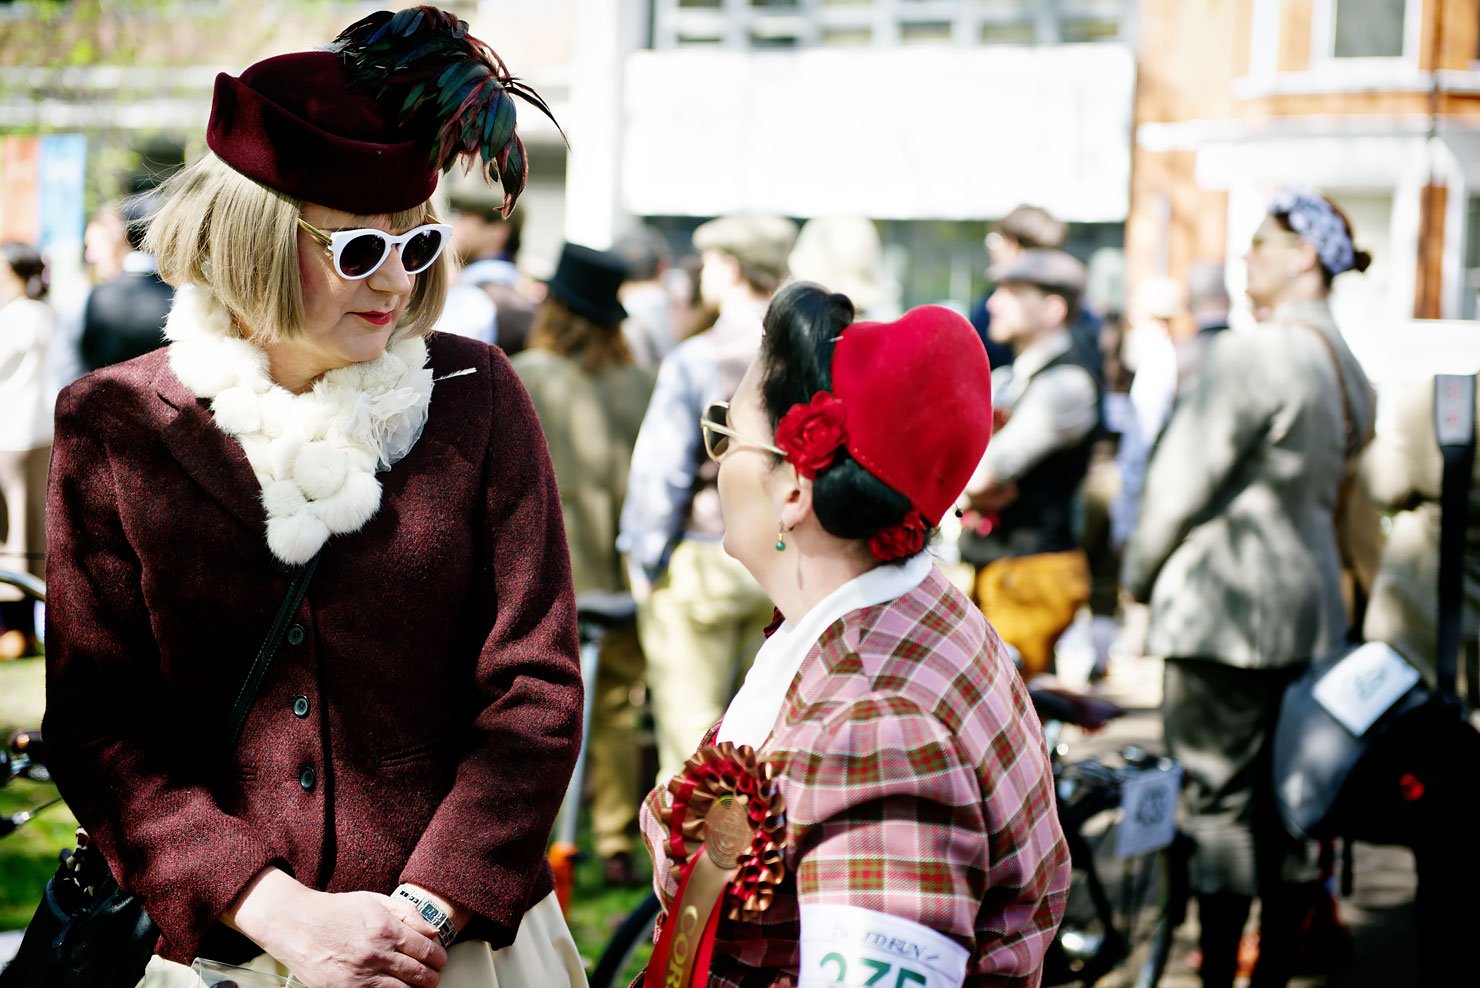 The Tweed Run London 2015: London's most stylish bike ride - Ladies chatting at the tea break at Red Lion Square